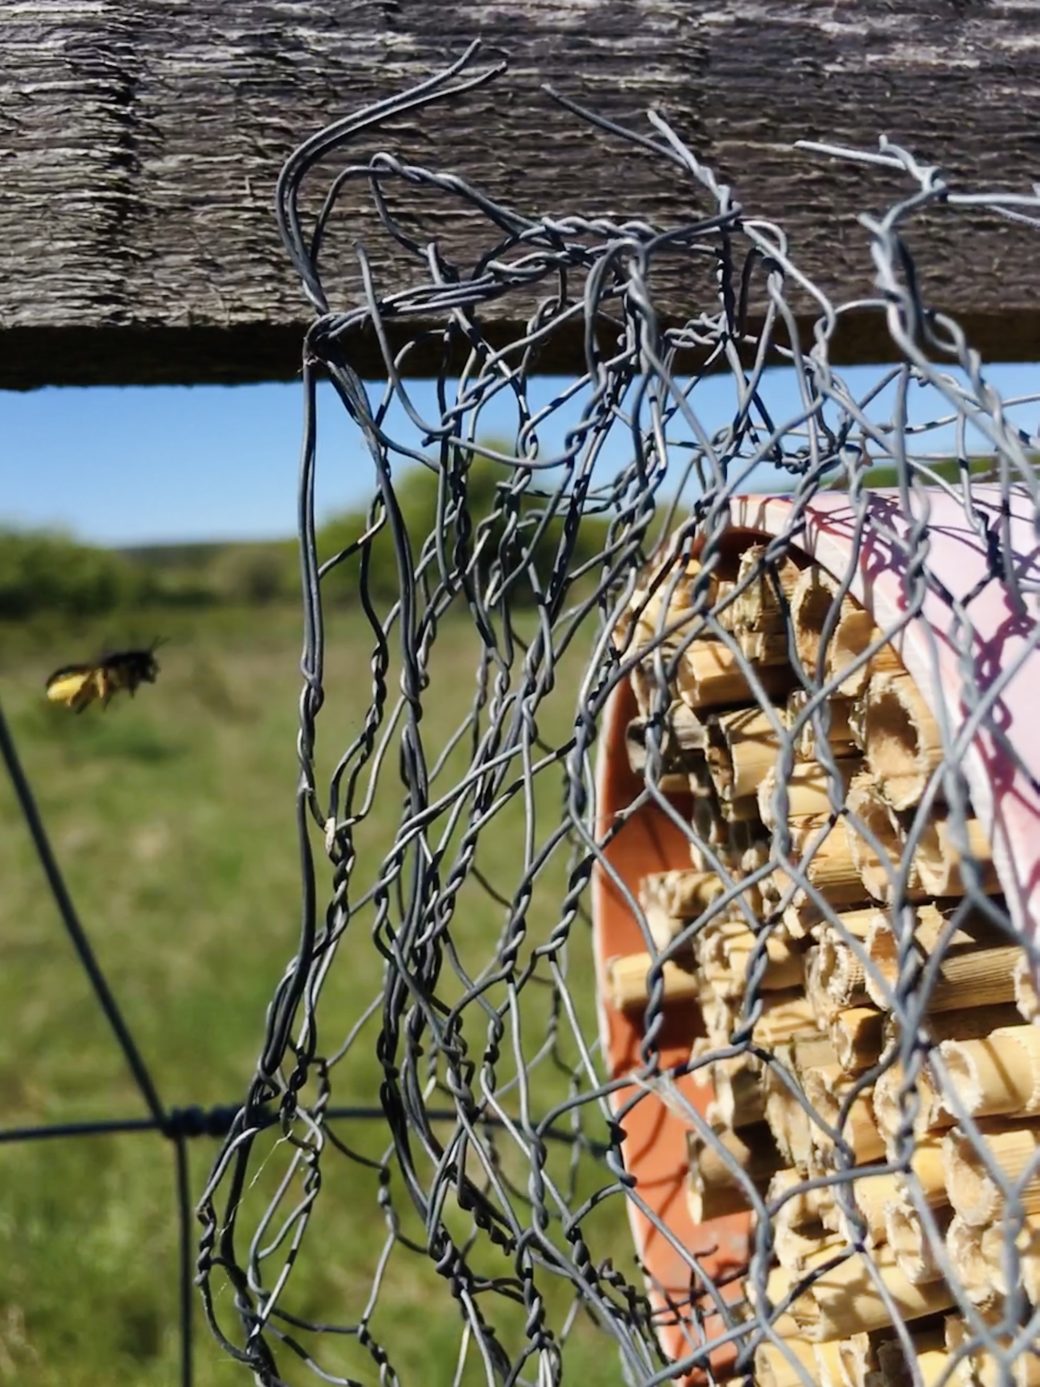 Picture: The photo shows a leafcutter bee approaching its nest, which is located in a nesting aid. The nesting aid is surrounded by wire mesh and attached to the fence of a climate measuring station in a meadow.